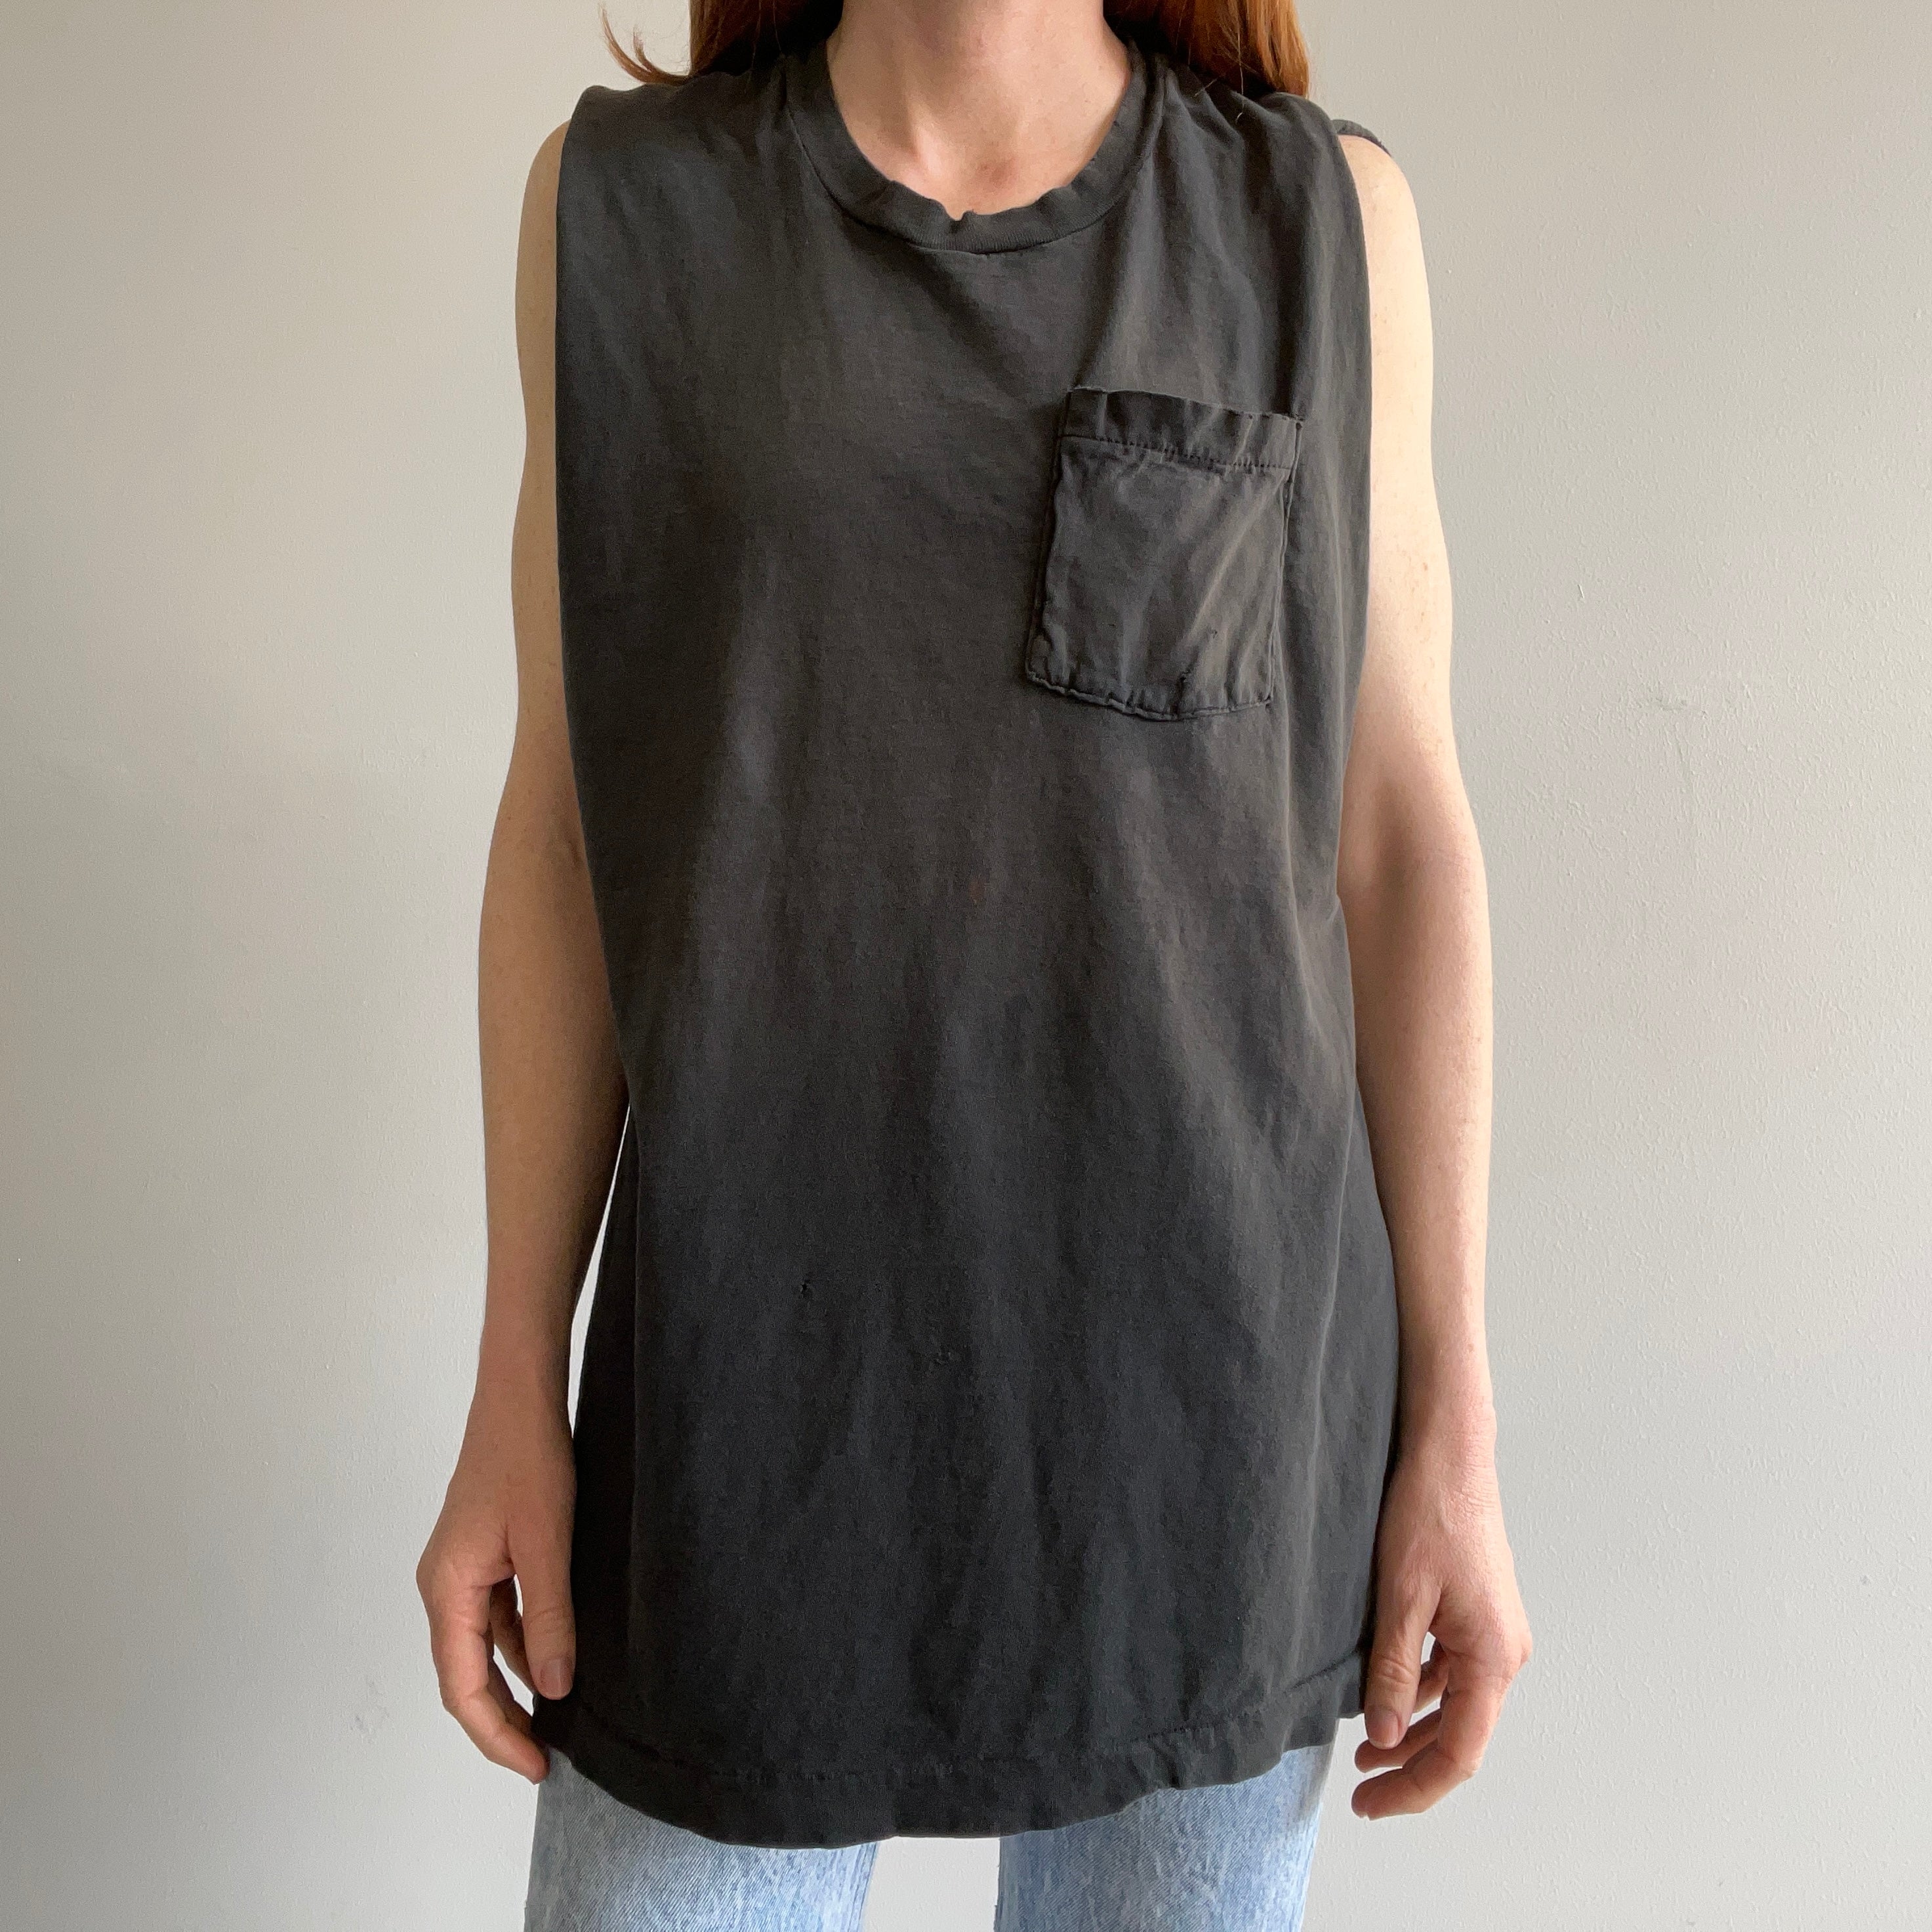 1980s Unevenly Cut Up Blank Black Muscle Tank